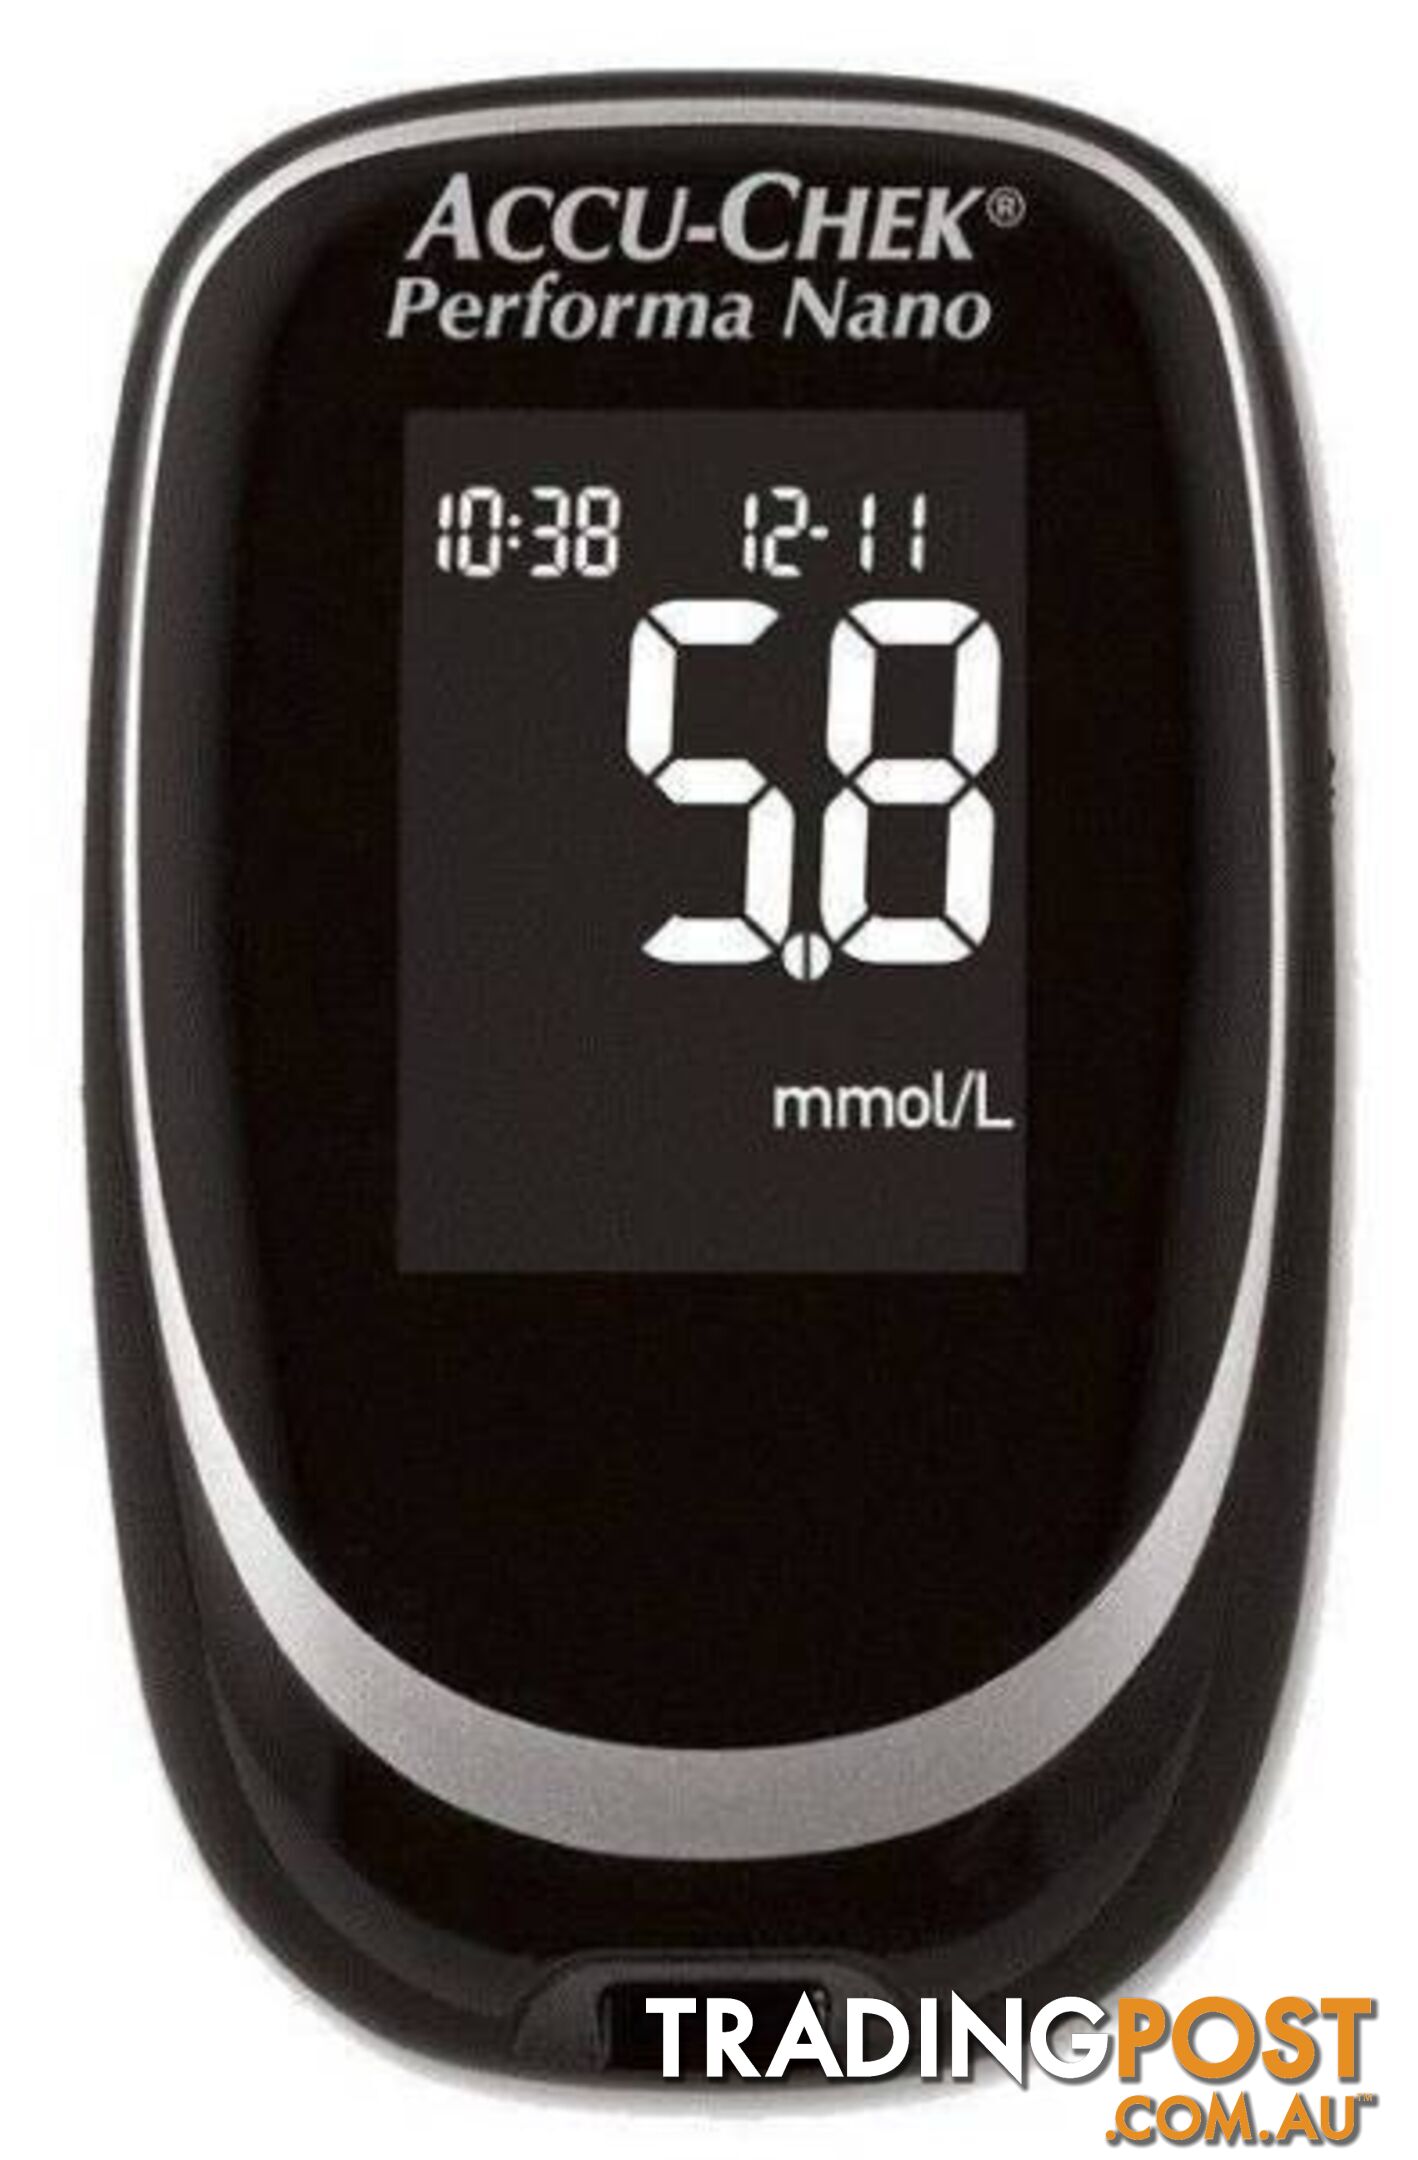 Accu-Chek Performa Nano Blood Glucose Meter and Lancing Device